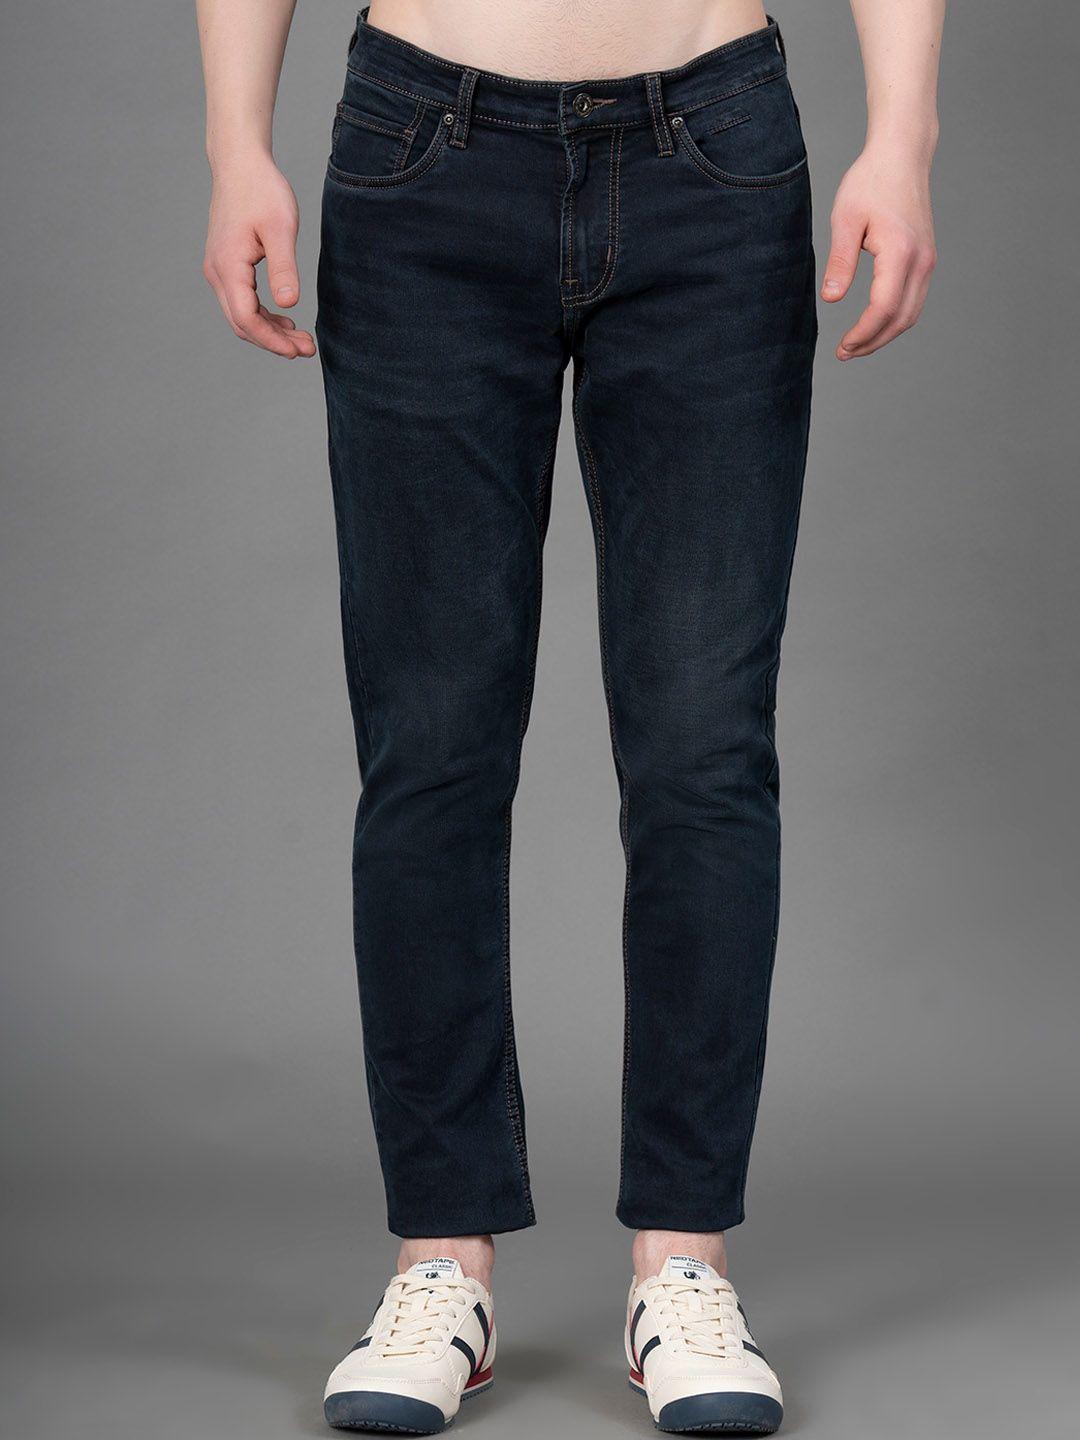 red tape men skinny fit clean look mid-rise stretchable jeans